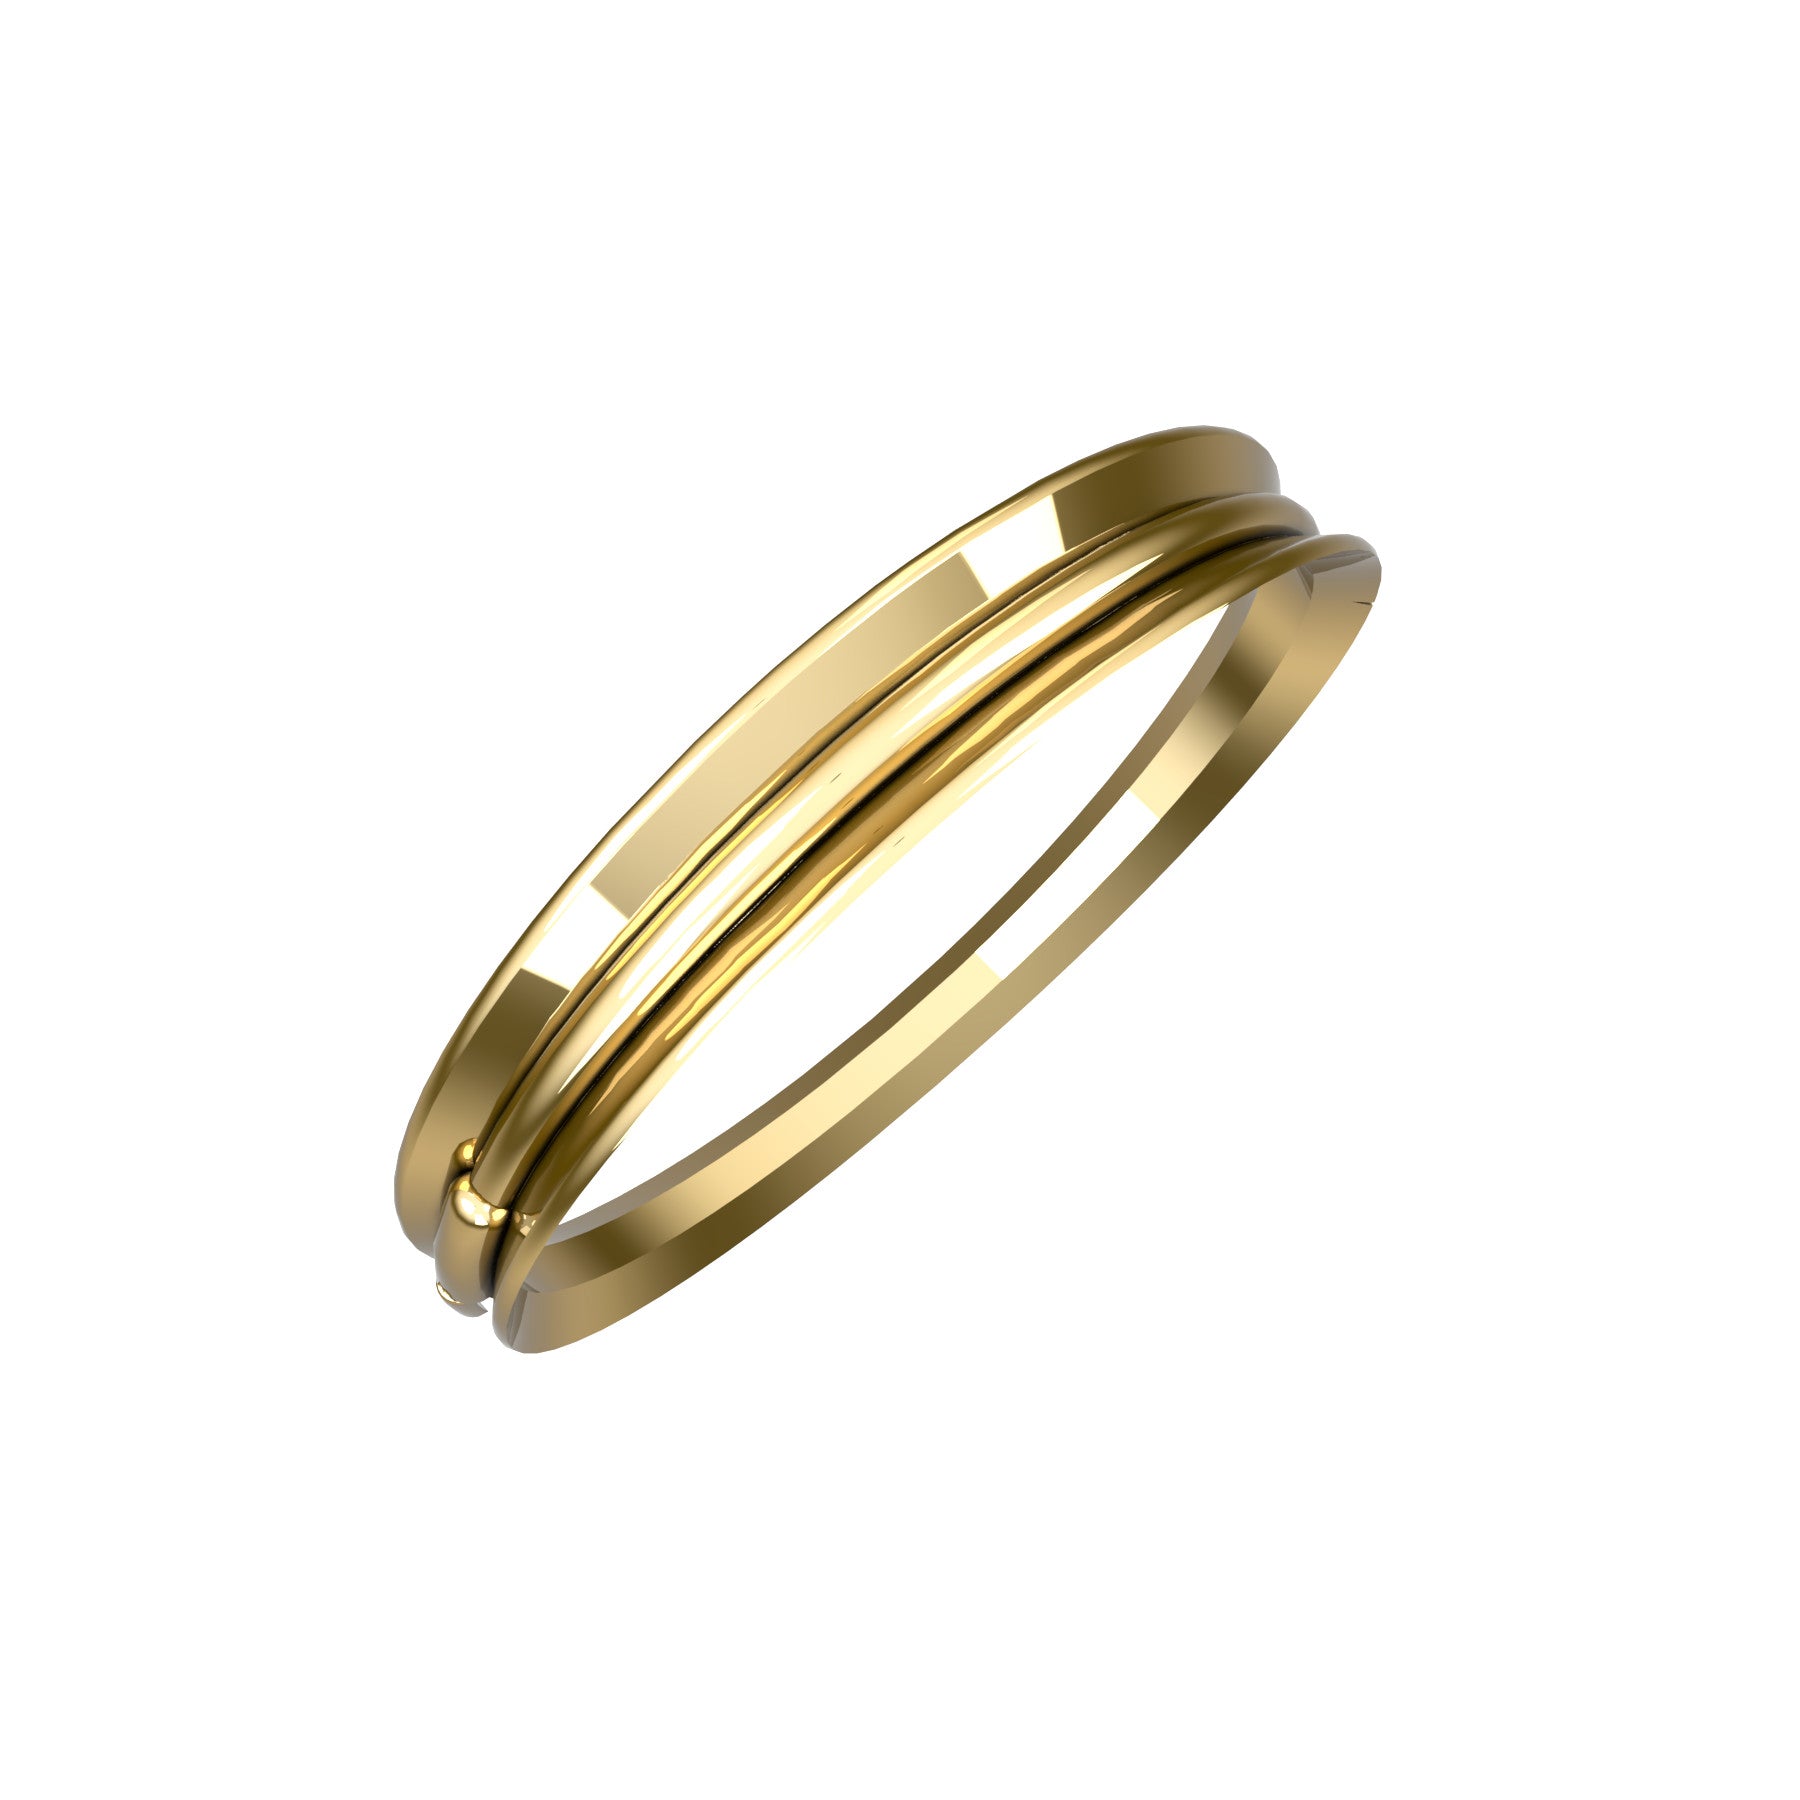 bobo rigid bracelet, 18 K yellow gold, weight  about 26,5 to 49,4 g (0.93 to 1.74 oz); width 13,0 mm max